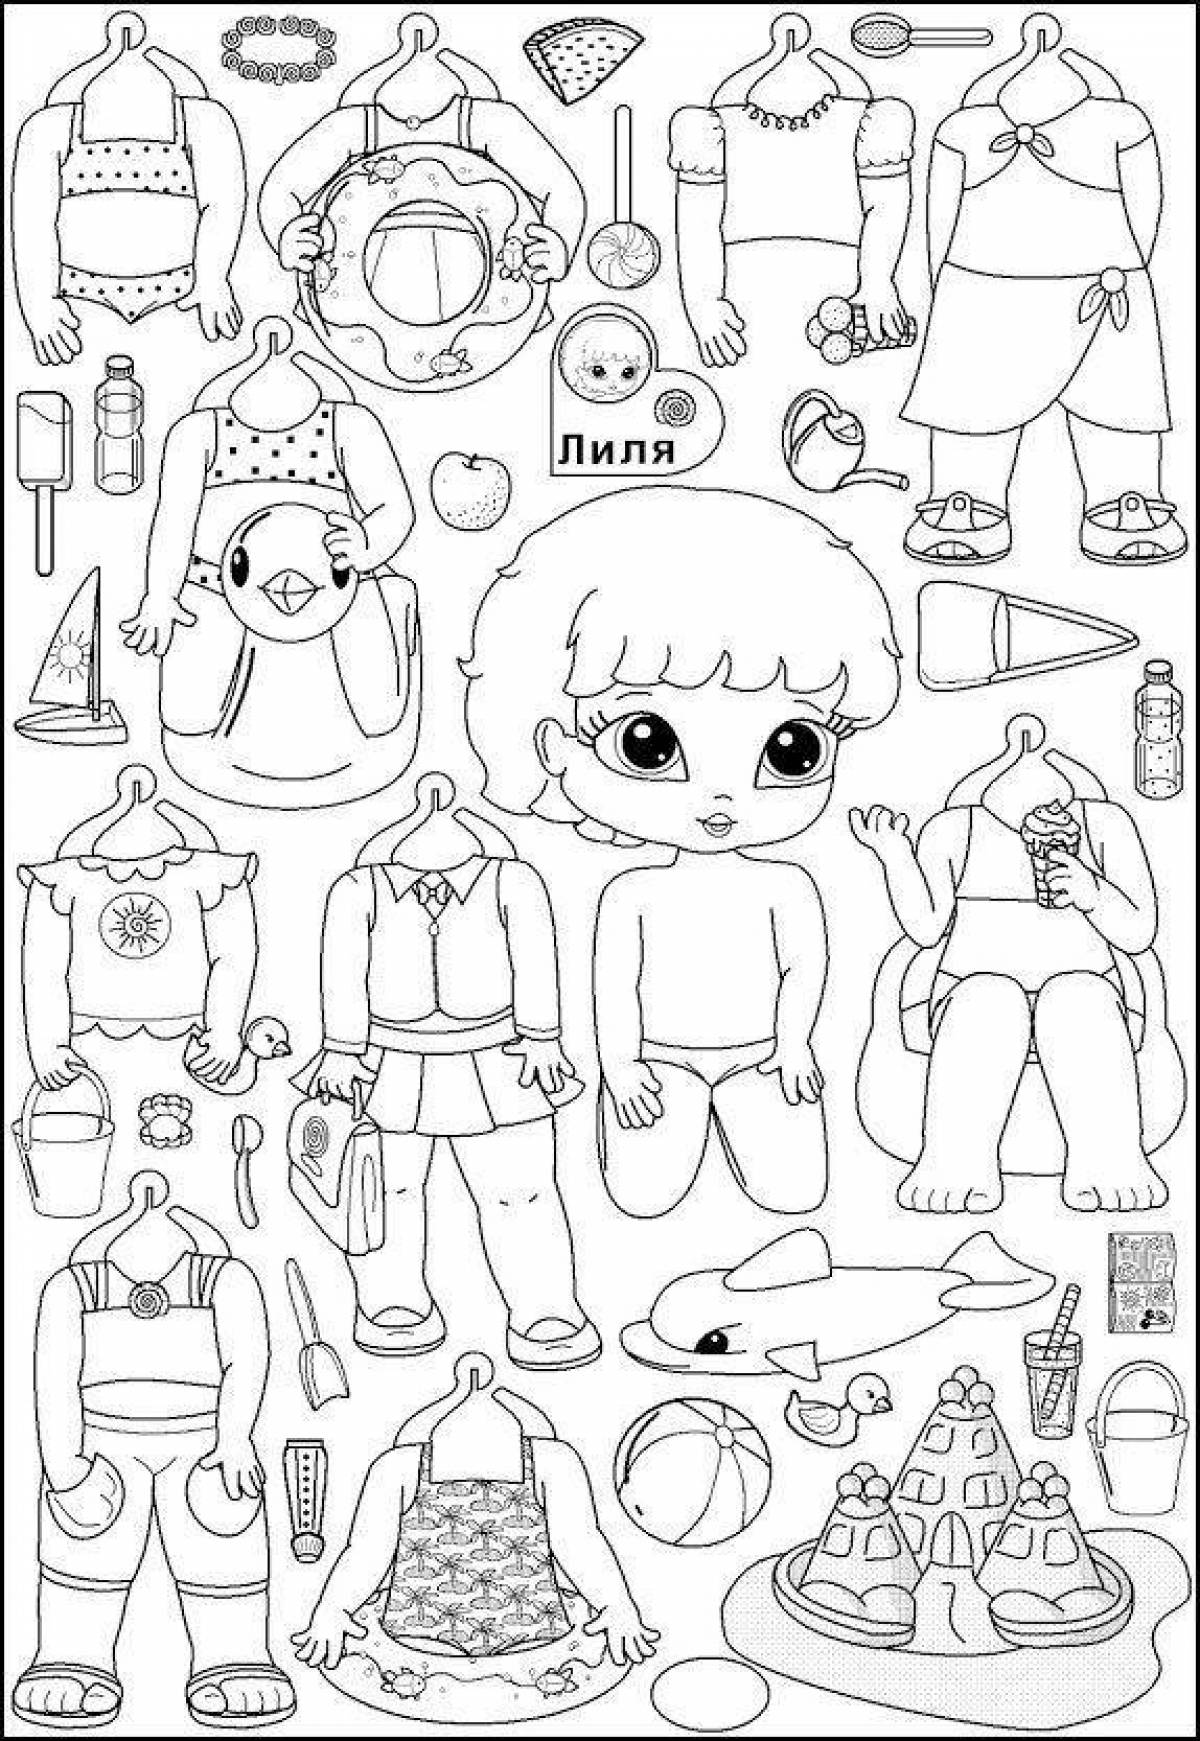 Colorful lol coloring book with clothes